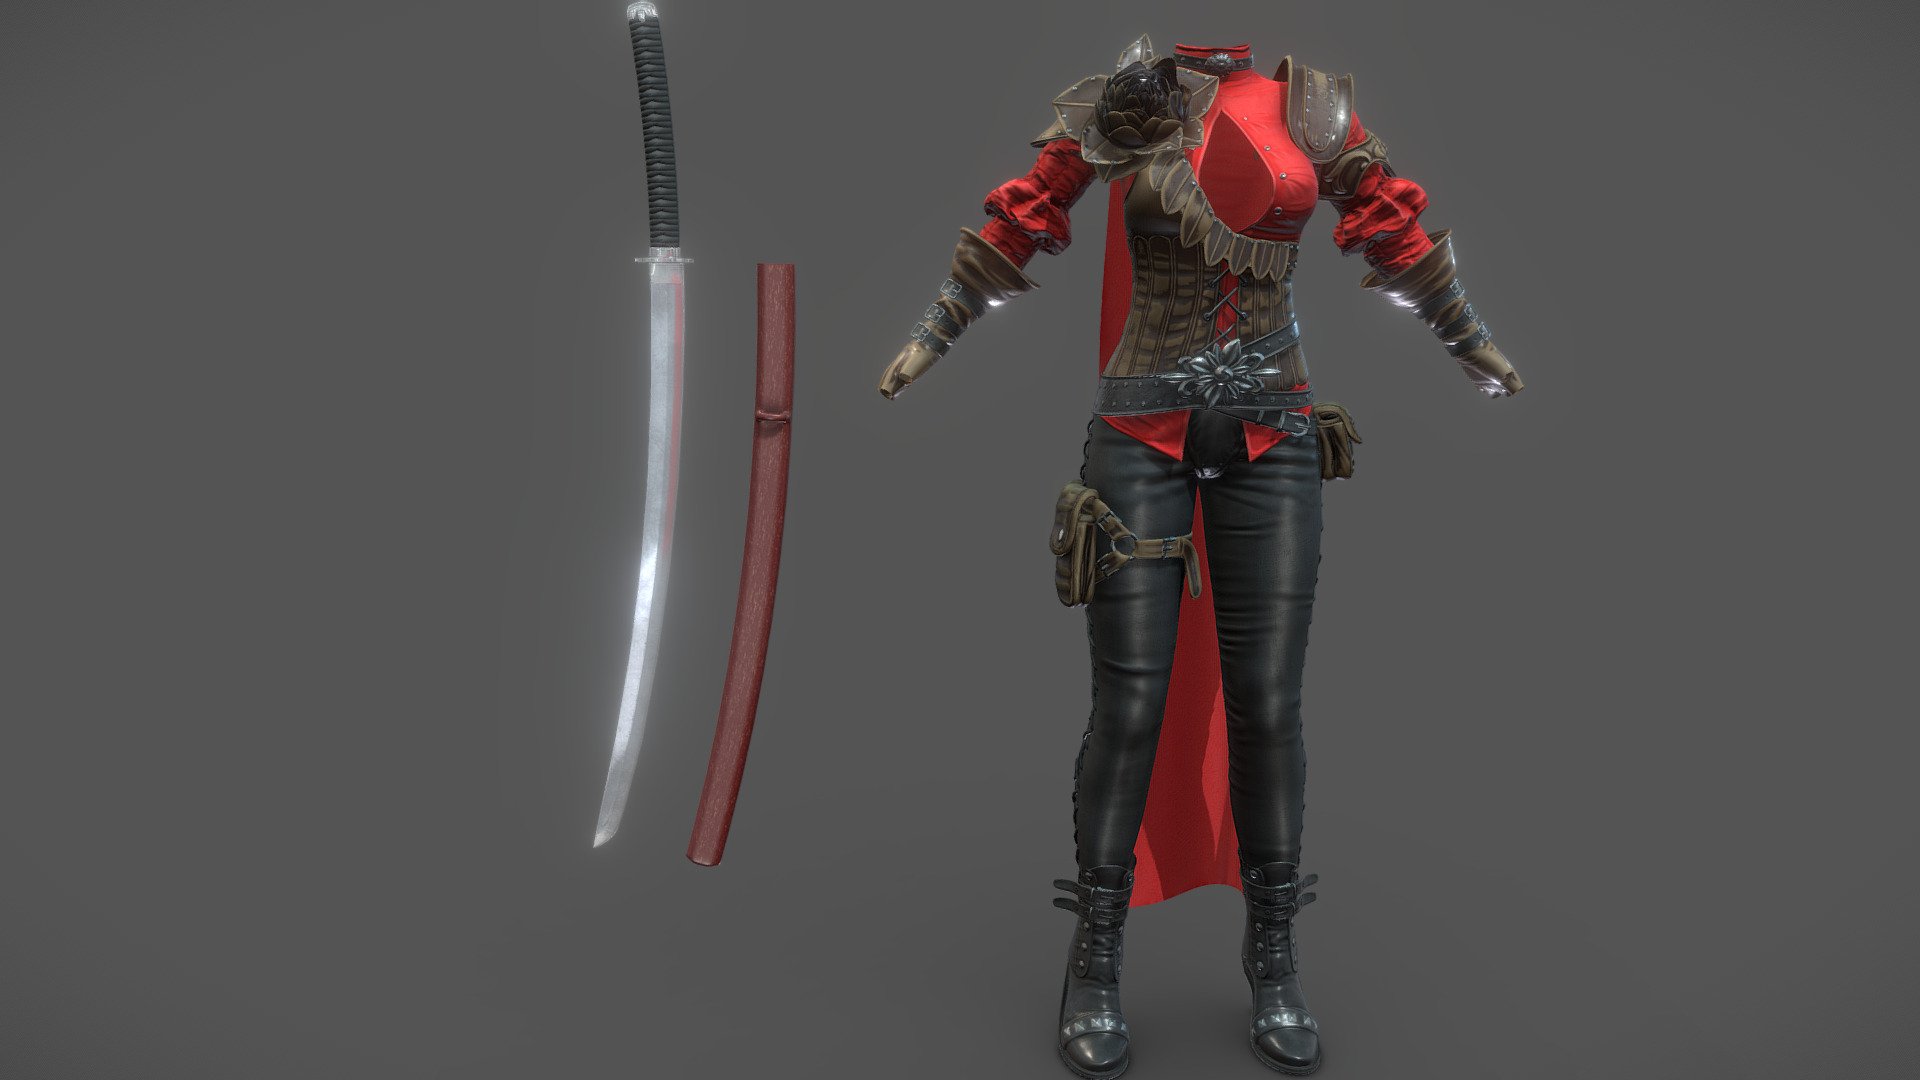 Cloak, gloves, pants, top , boots, sword are separate objects

Can fit to any character, ready for games

Quads, clean topology

No overlapping unwrapped UVs

High quality realistic textues : baked albedo, specular, normals, ao

FBX, OBJ, gITF, USDZ (request other formats)

PBR or Classic

Please ask for any other questions

Type     user:3dia &ldquo;search term